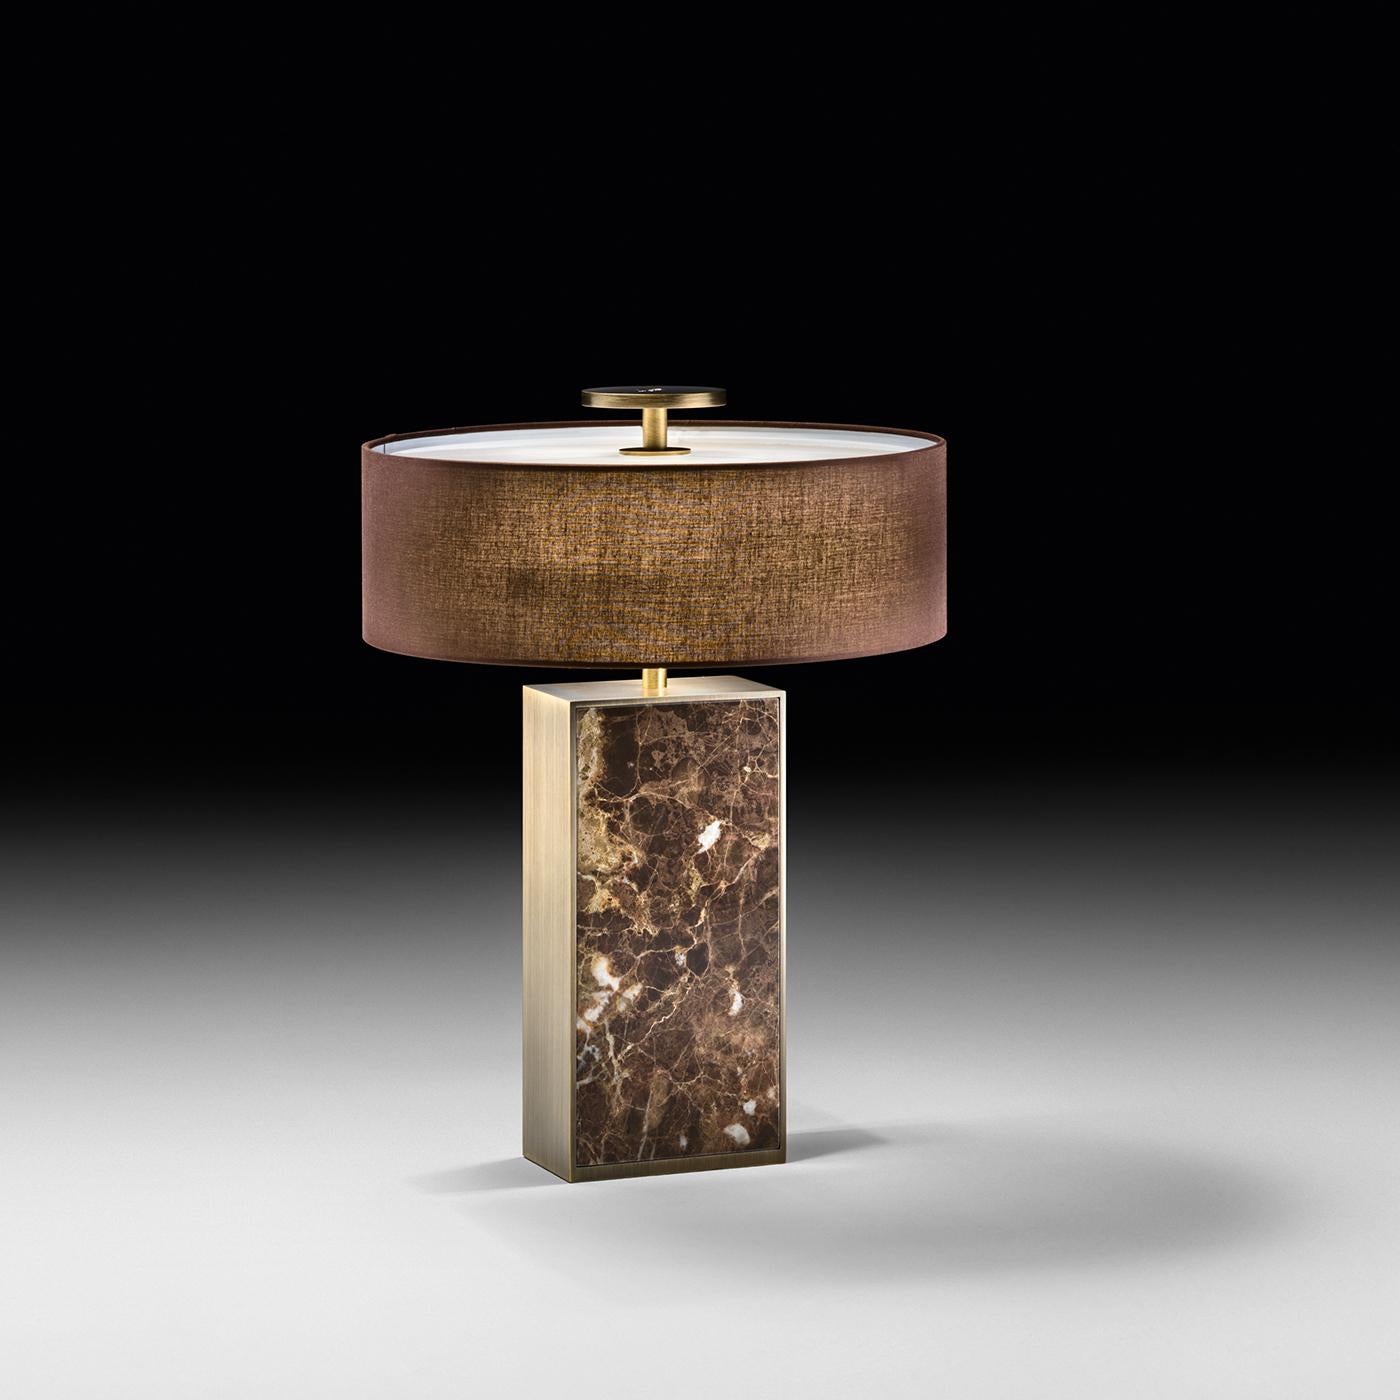 Infused with sophistication and charm, this stunning lamp is a modern and opulent piece of functional decor. It features a drum-shaped lampshade made of a brown rigid fabric, and supported by a rectangular base of Emperador marble. This superb lamp